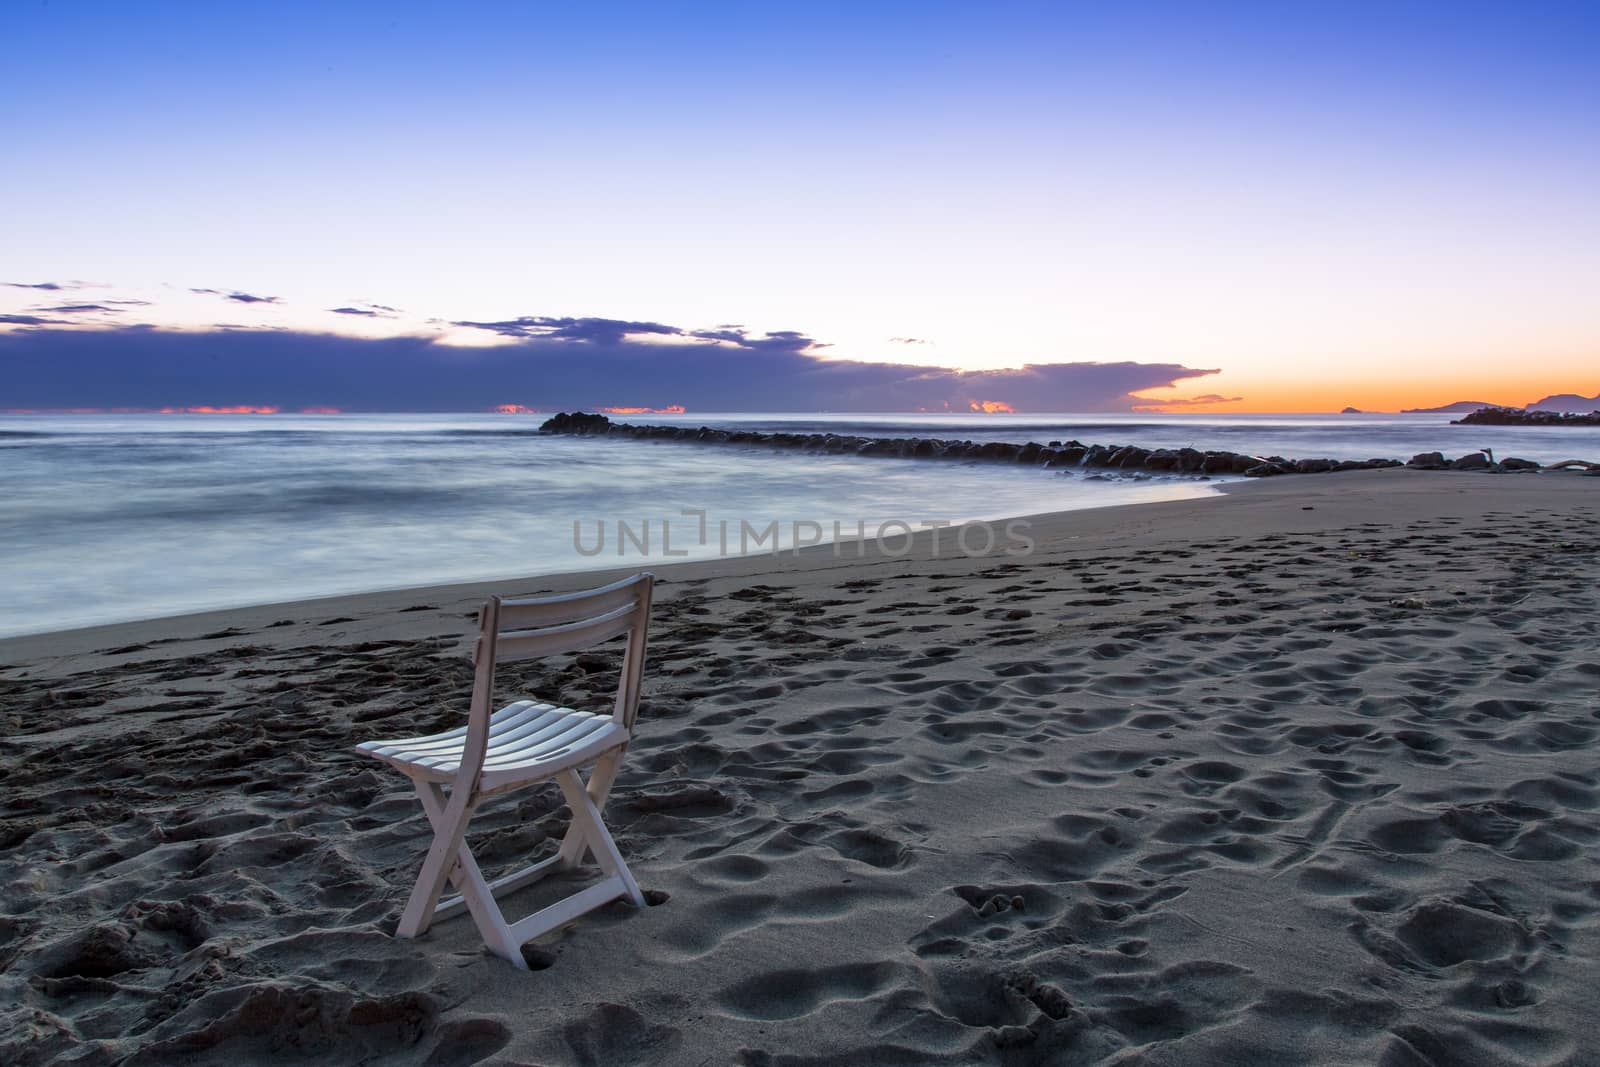 View of a chair on a beach of the Tuscan coast at sunset